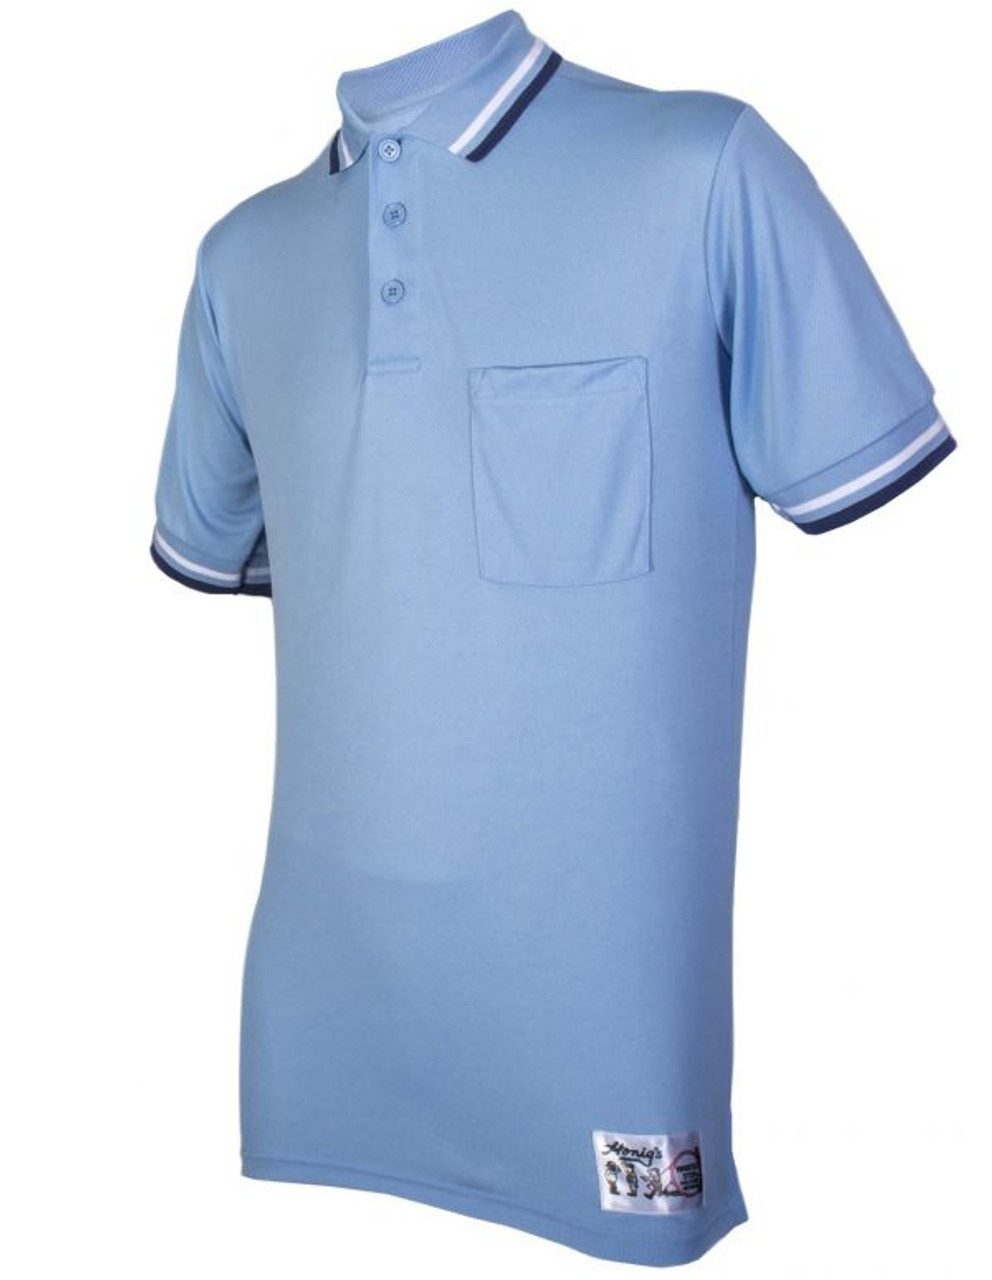 Details about   VTG Honig's Whistle Stop Umpire Blue Polo Jersey Shirt Baseball Made USA Mens XL 